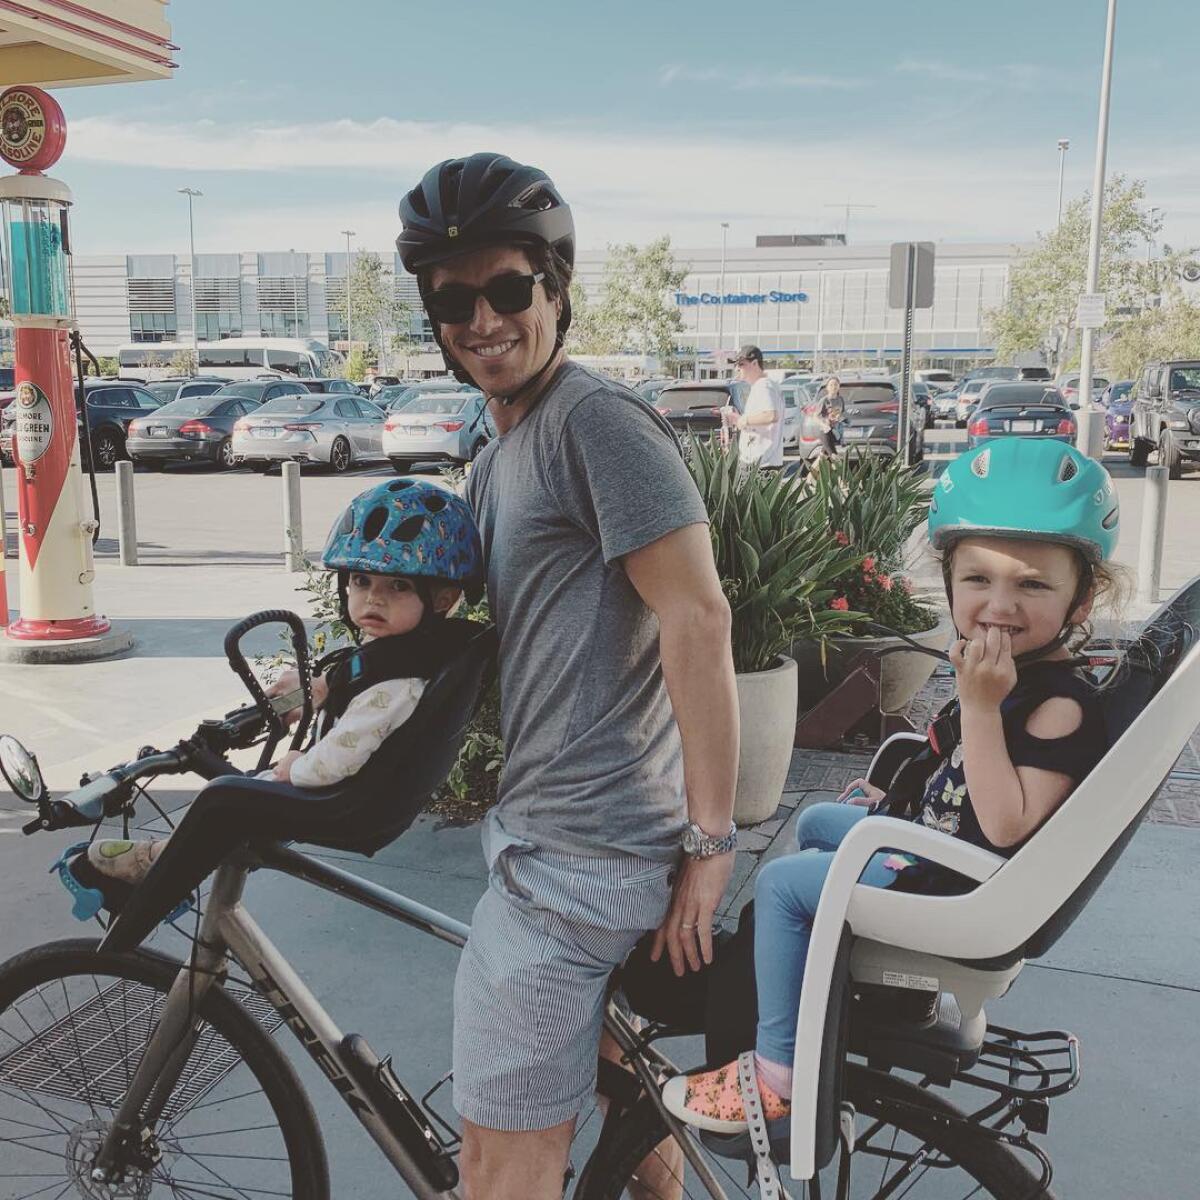 Michael Schneider with two of his three kids on a bike.